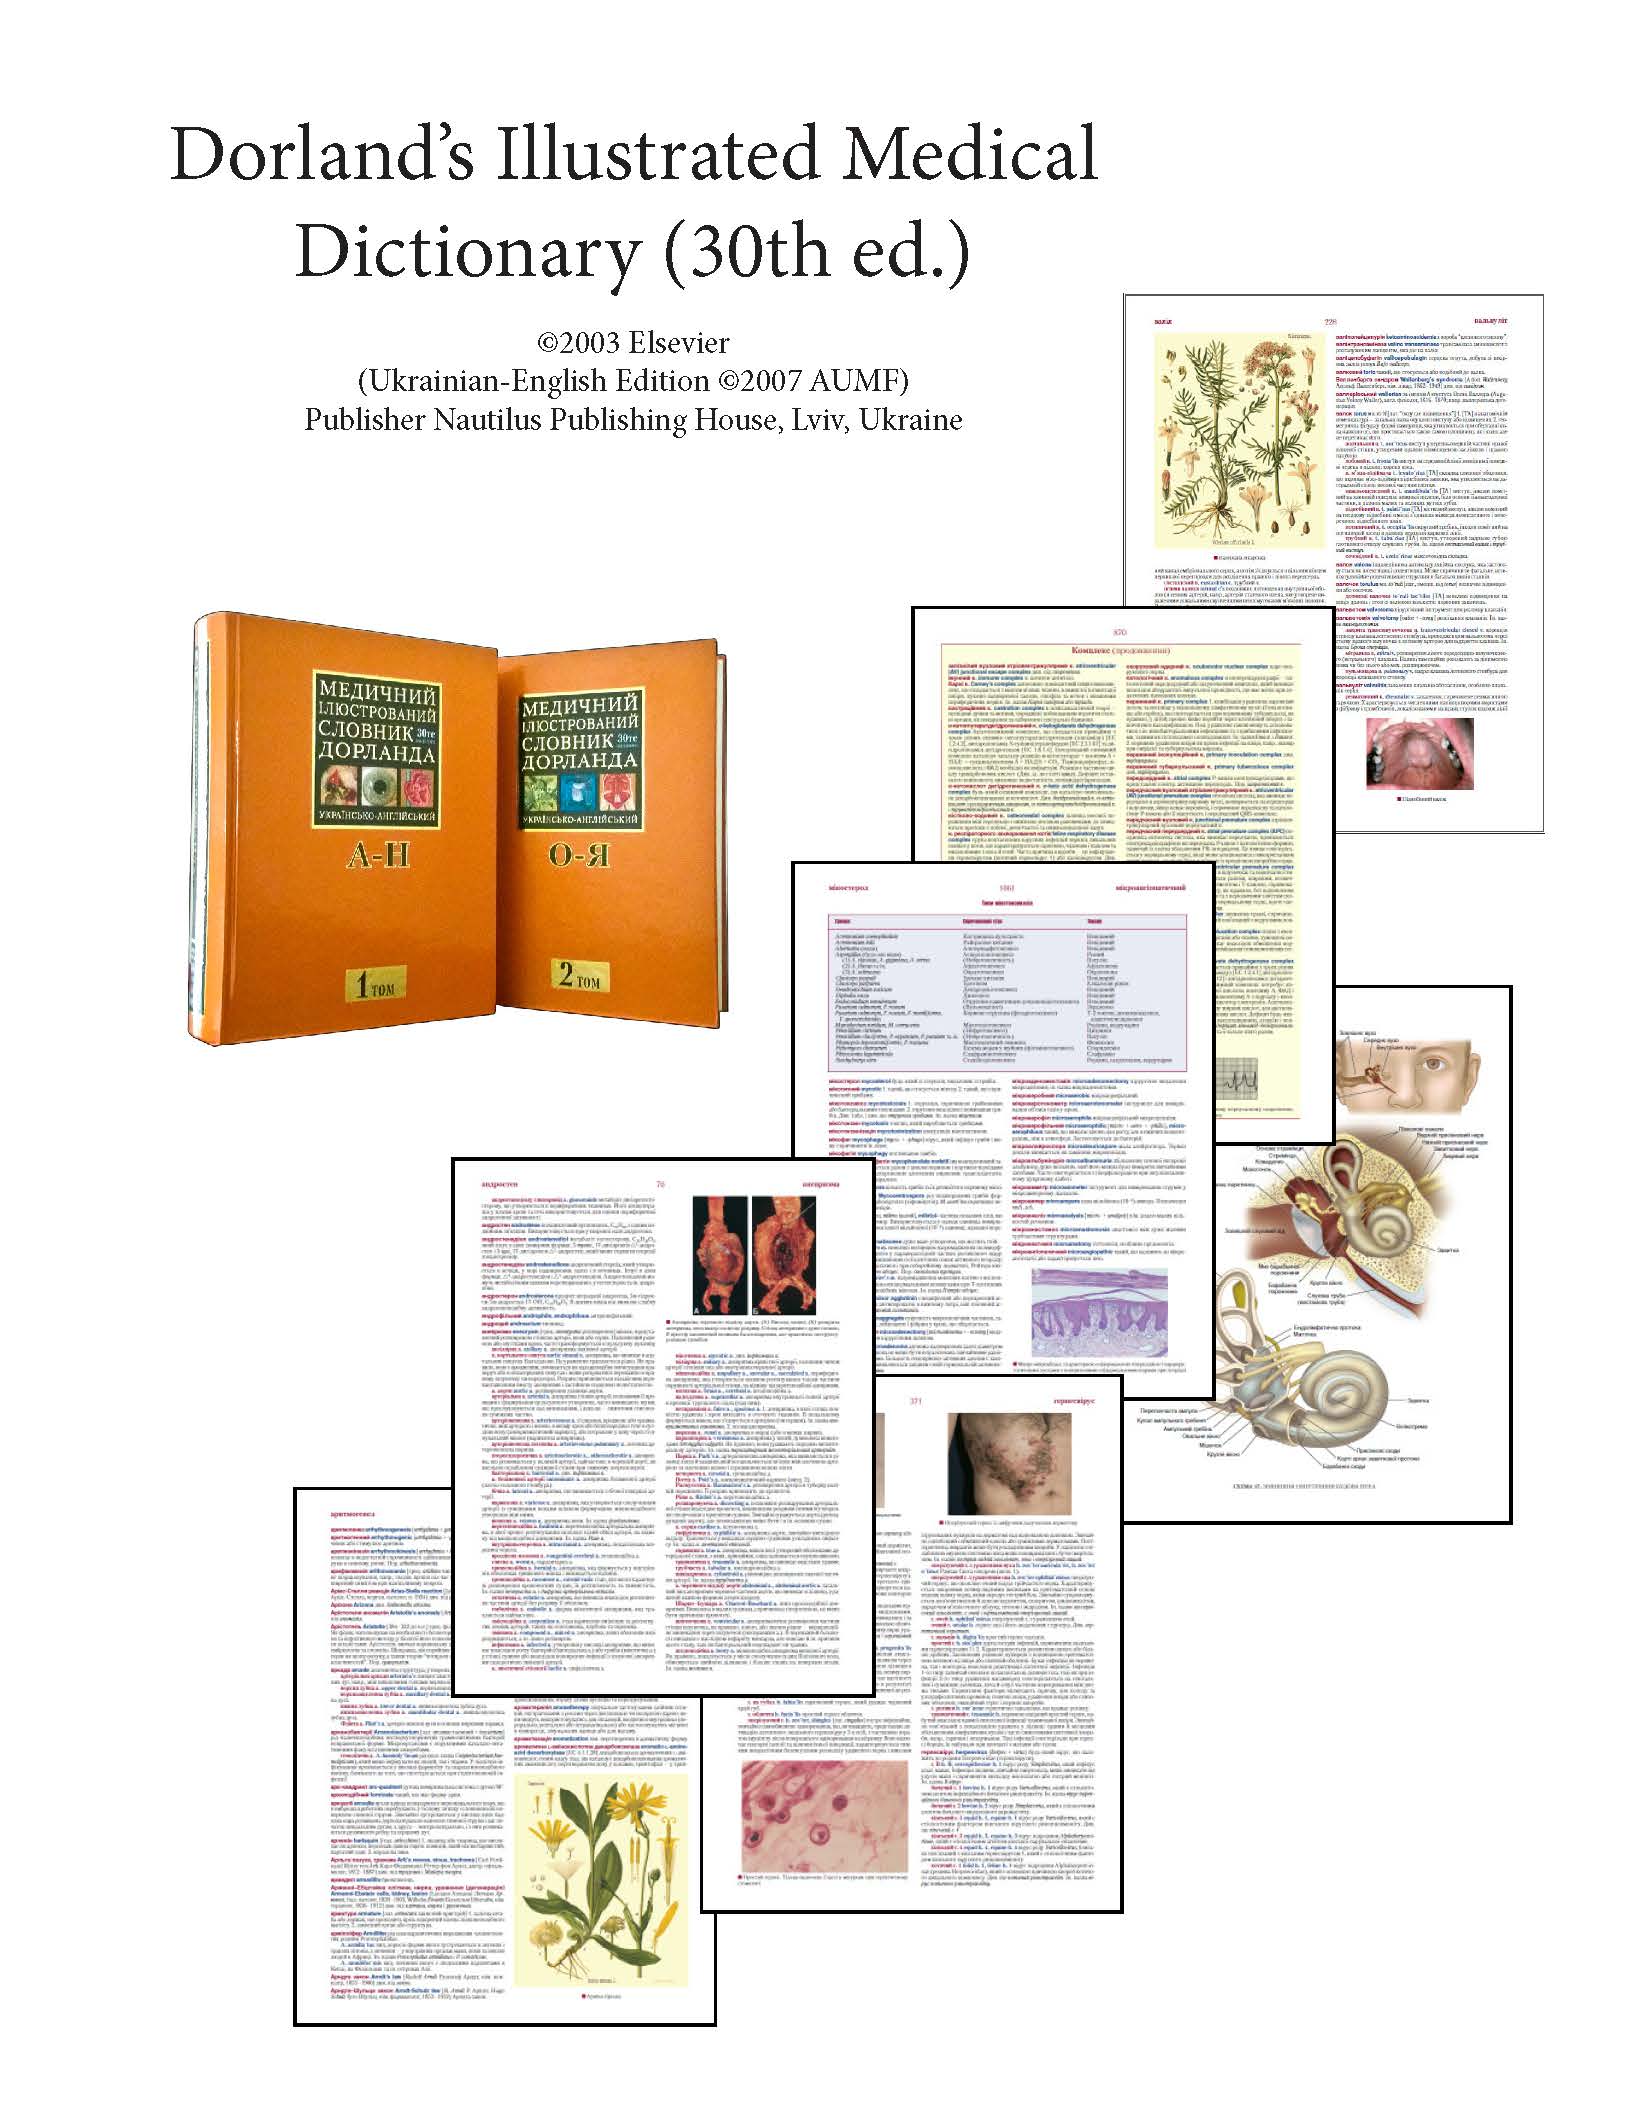 dorlands-illustrated-medical-dictionary-1